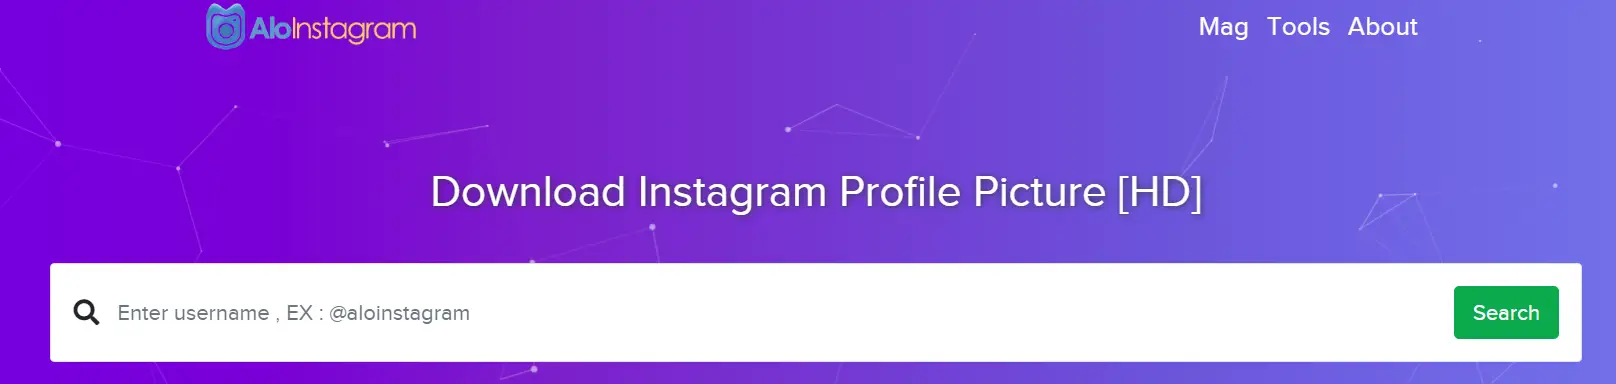 g4 - How to Download Instagram Profile Picture in High Resolution 15